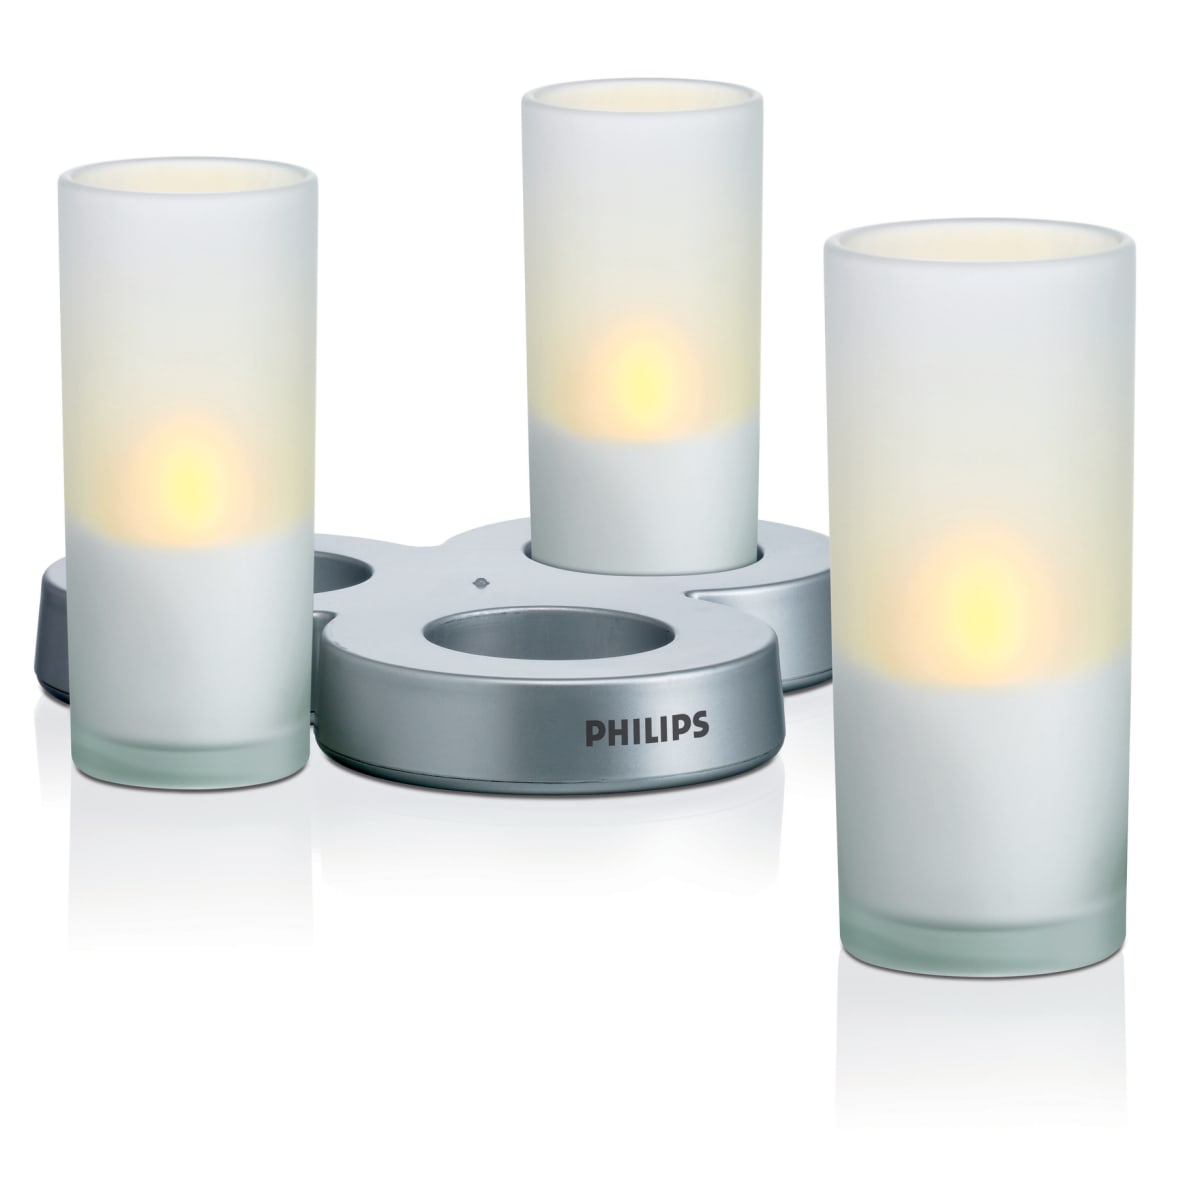 Philips 691086048 3 LED Specialty Table Lamp | Build.com